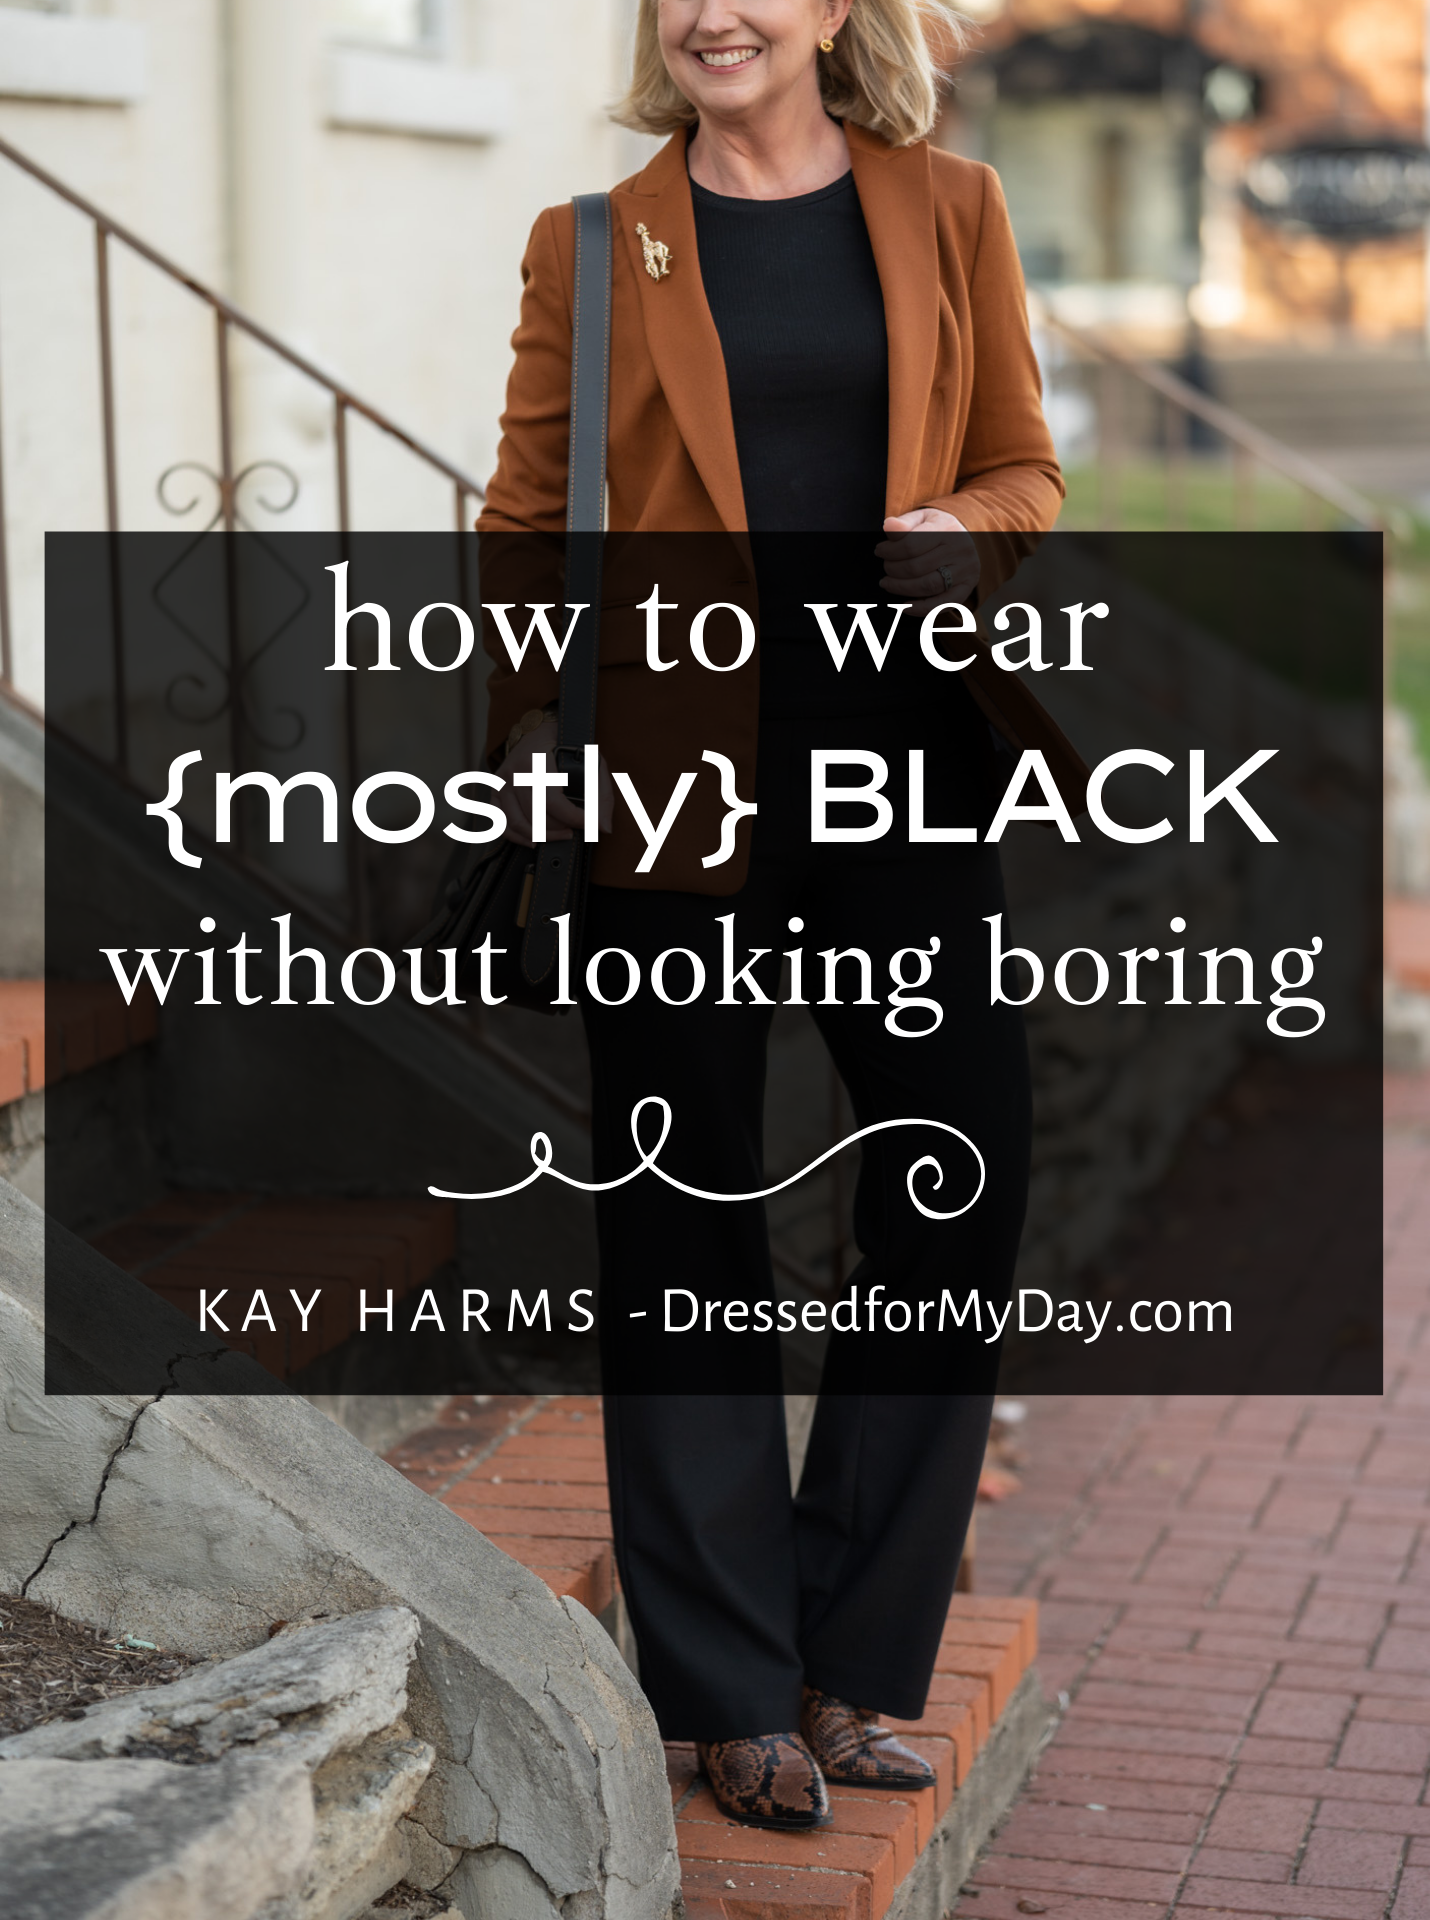 How to Wear Mostly Black Without Looking Boring